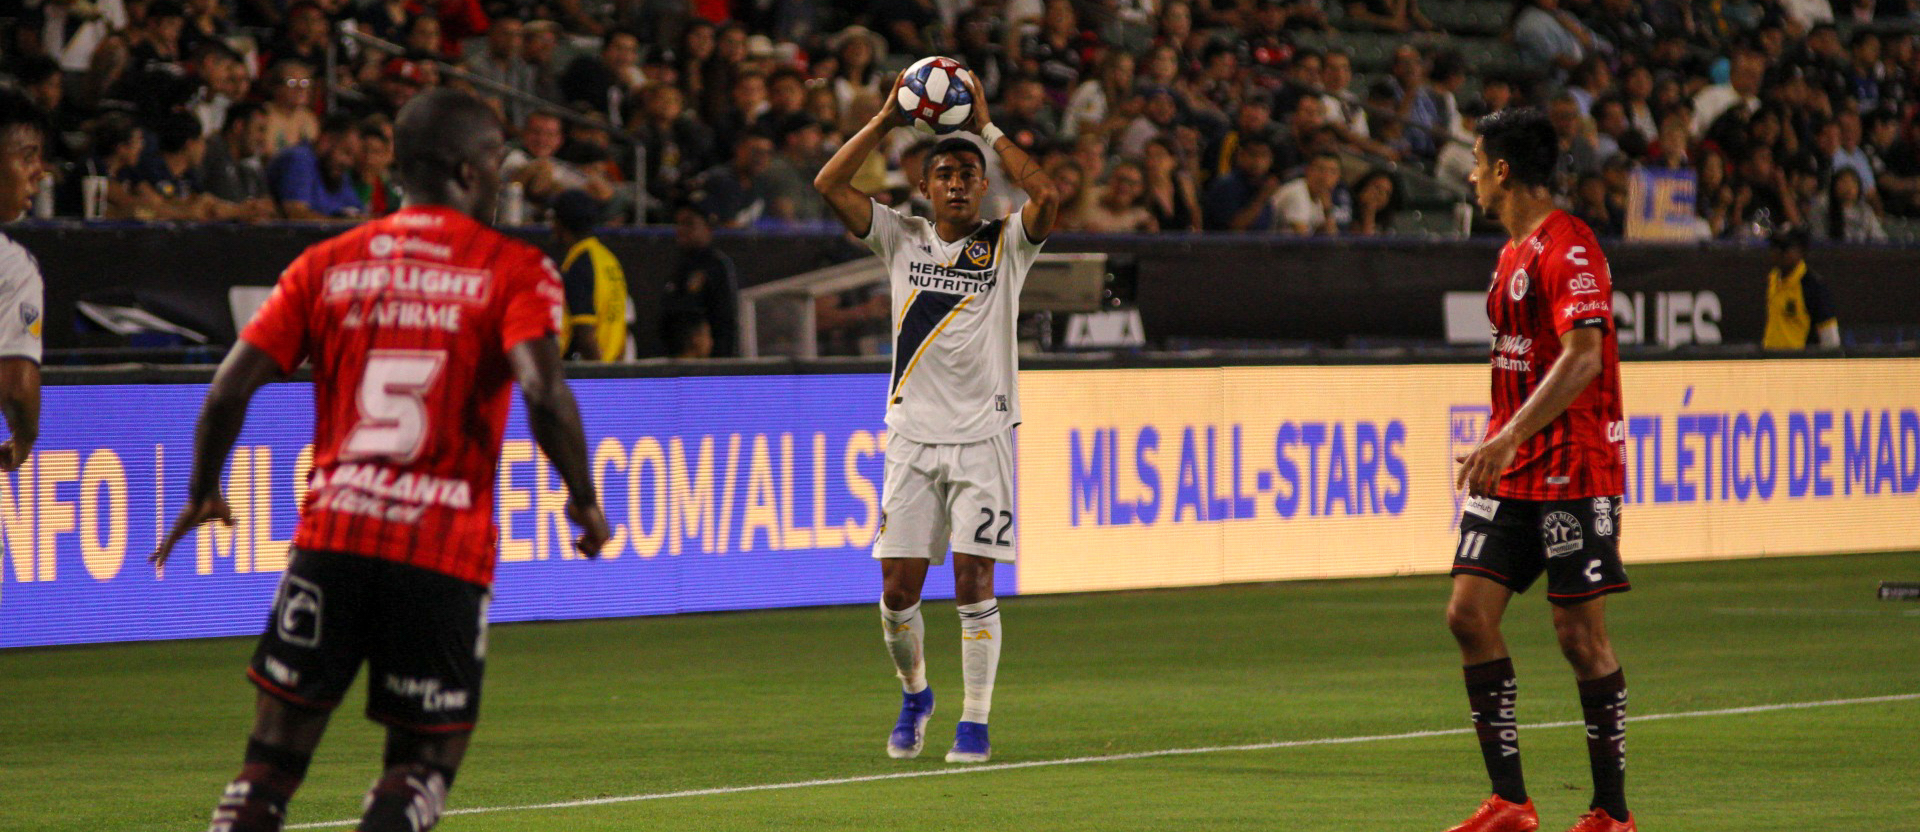 Julian Araujo takes a throw in playing for the LA Galaxy on 7.23.19 - Photo by Brittany Campbell